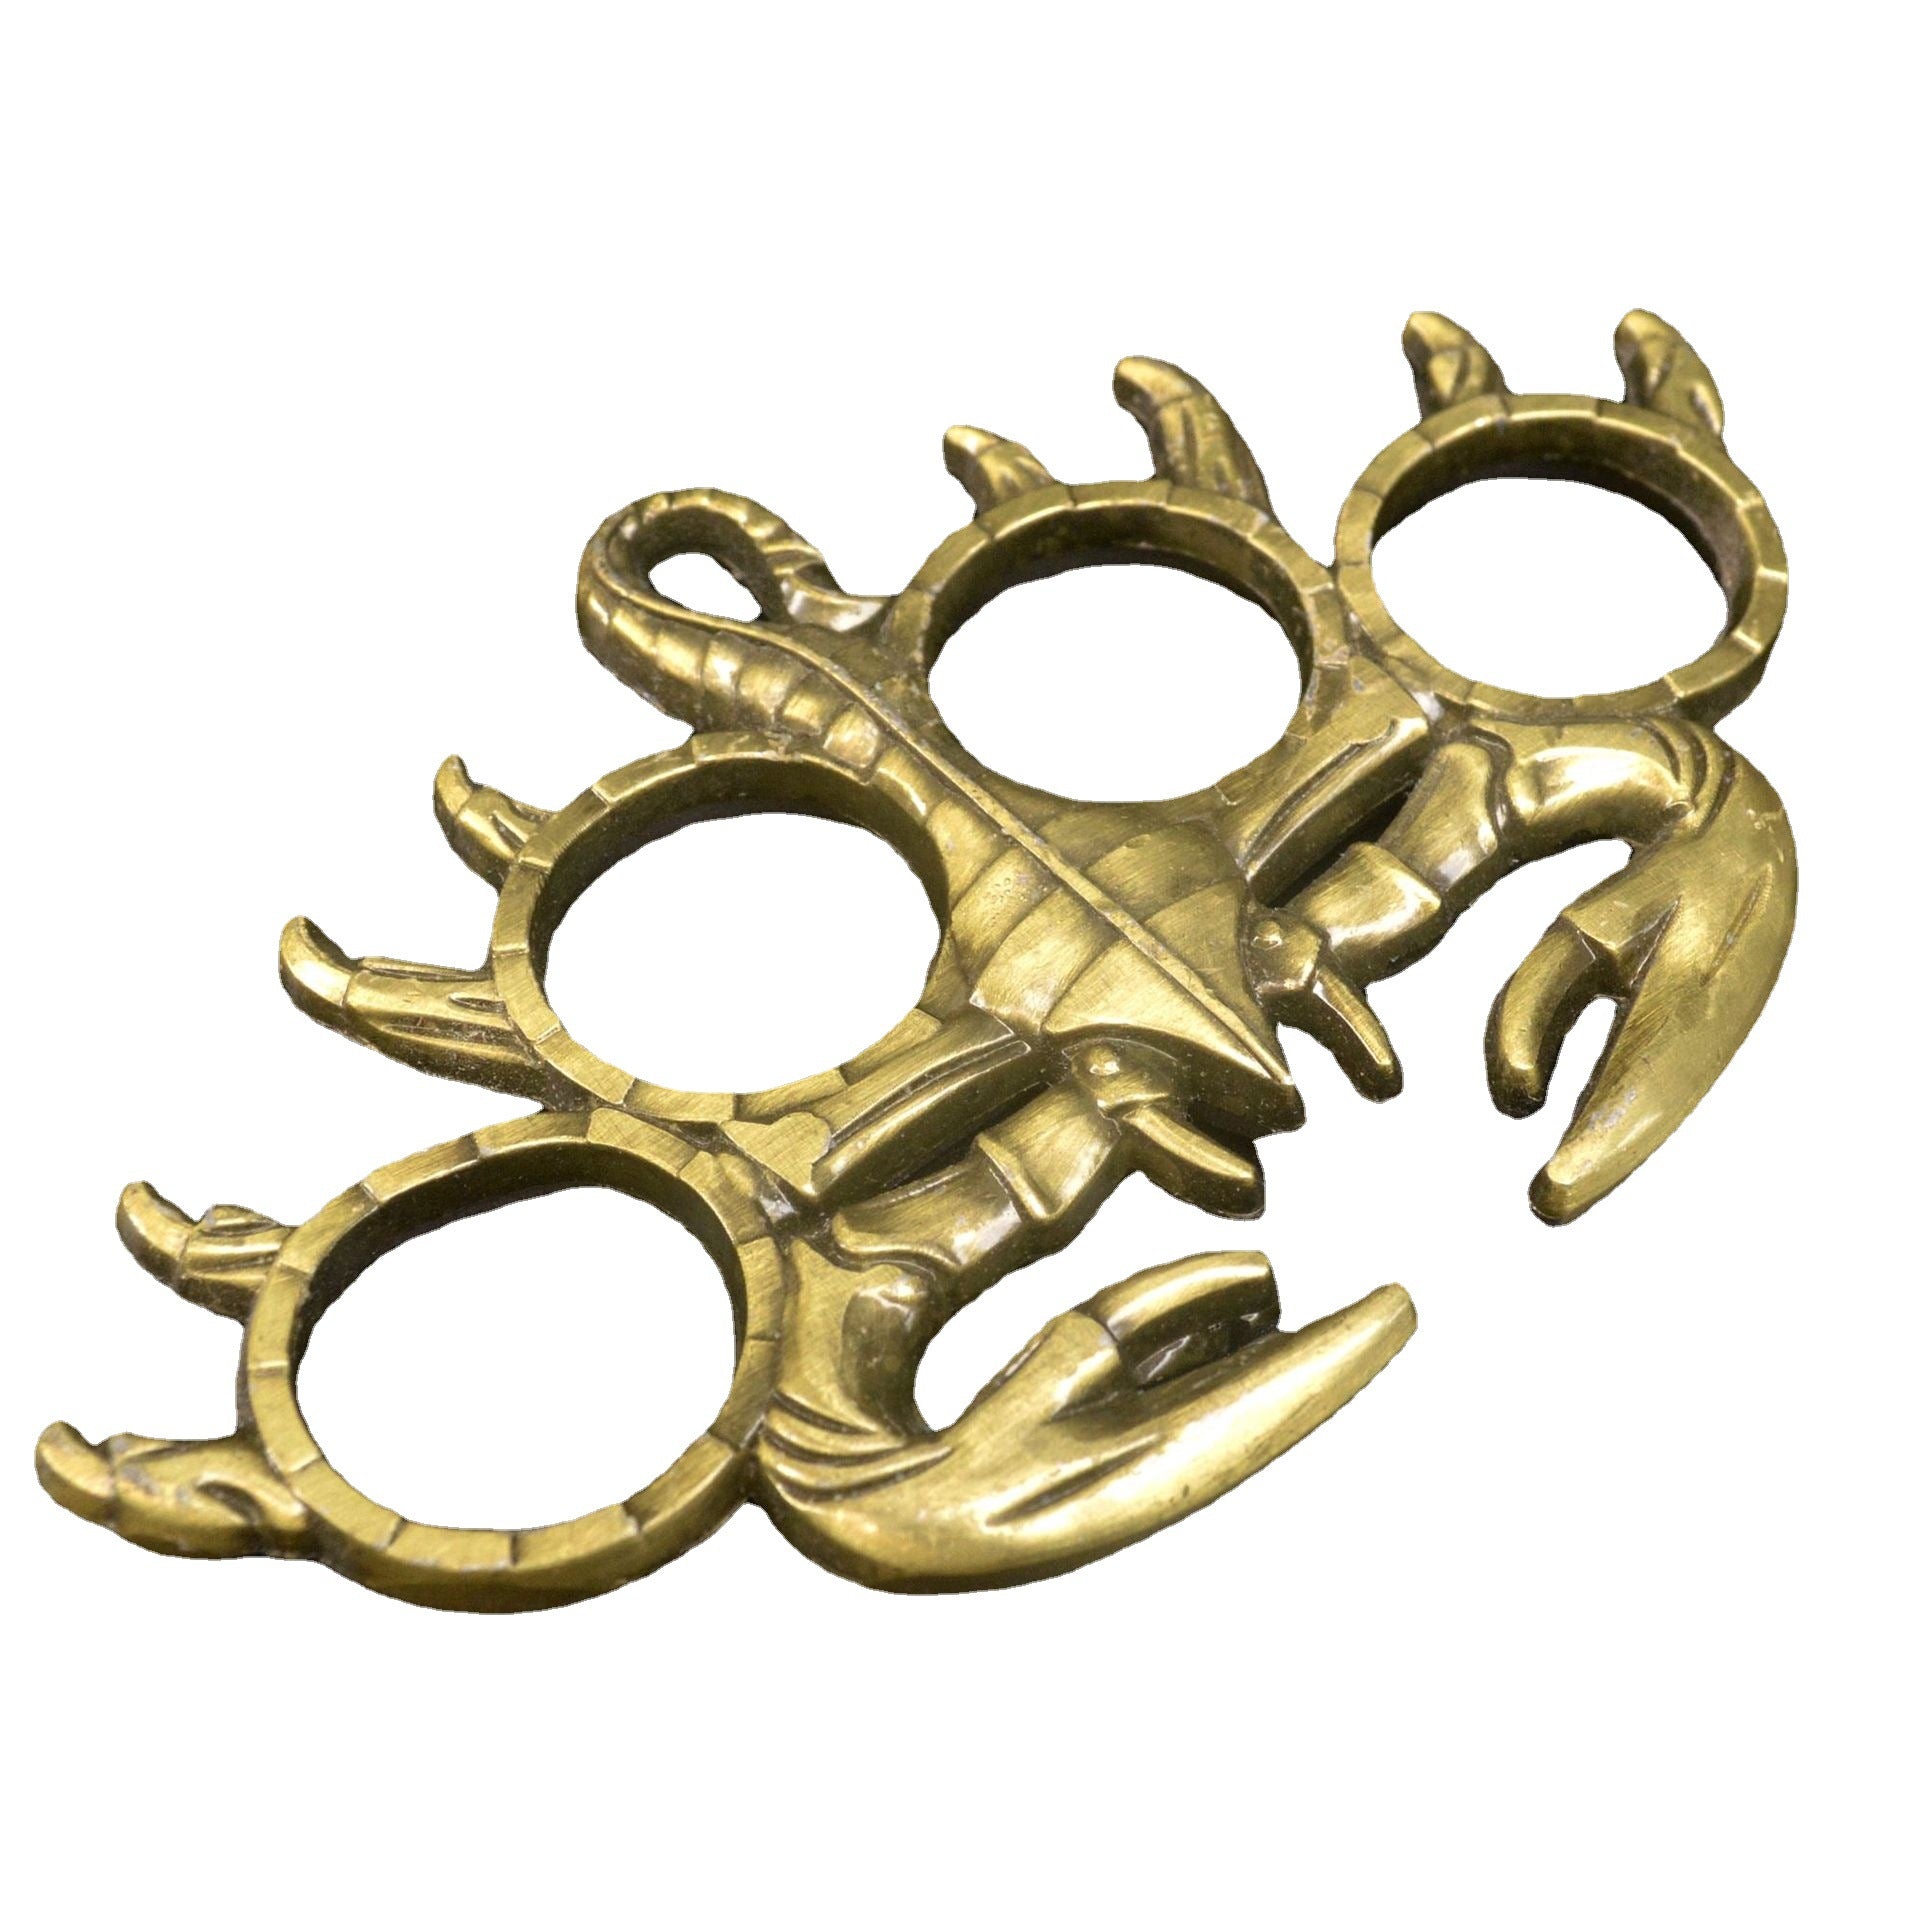 Small Scorpion Knuckle Duster Protective Tool